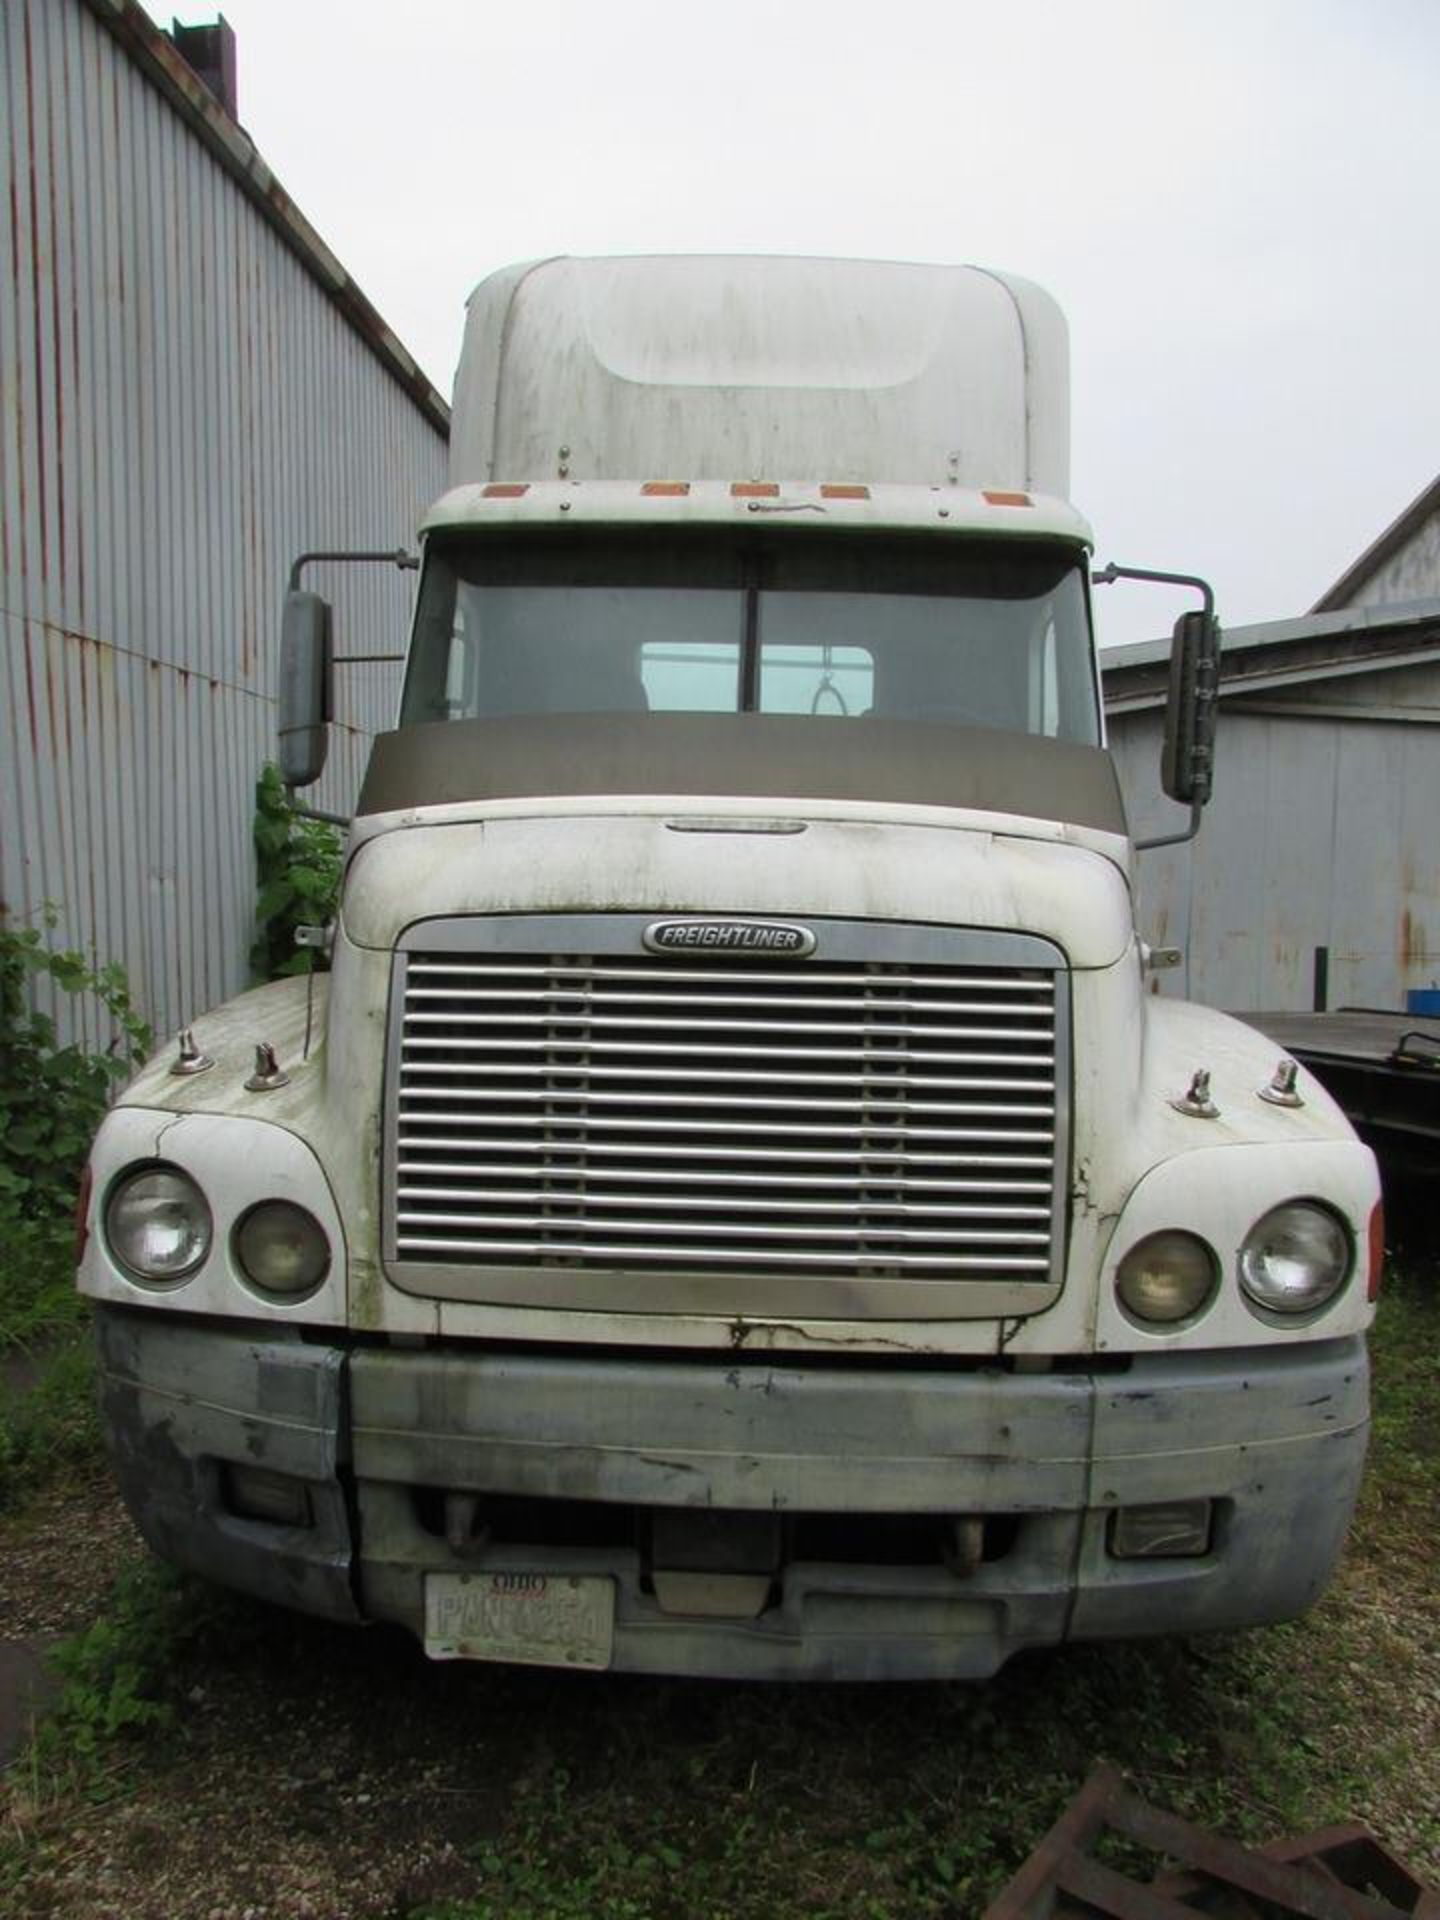 2002 Freightliner Century Class Day Cab Truck Tractor, 52,000 GVWR, Eaton Fuller 10-Speed Manual - Image 2 of 20